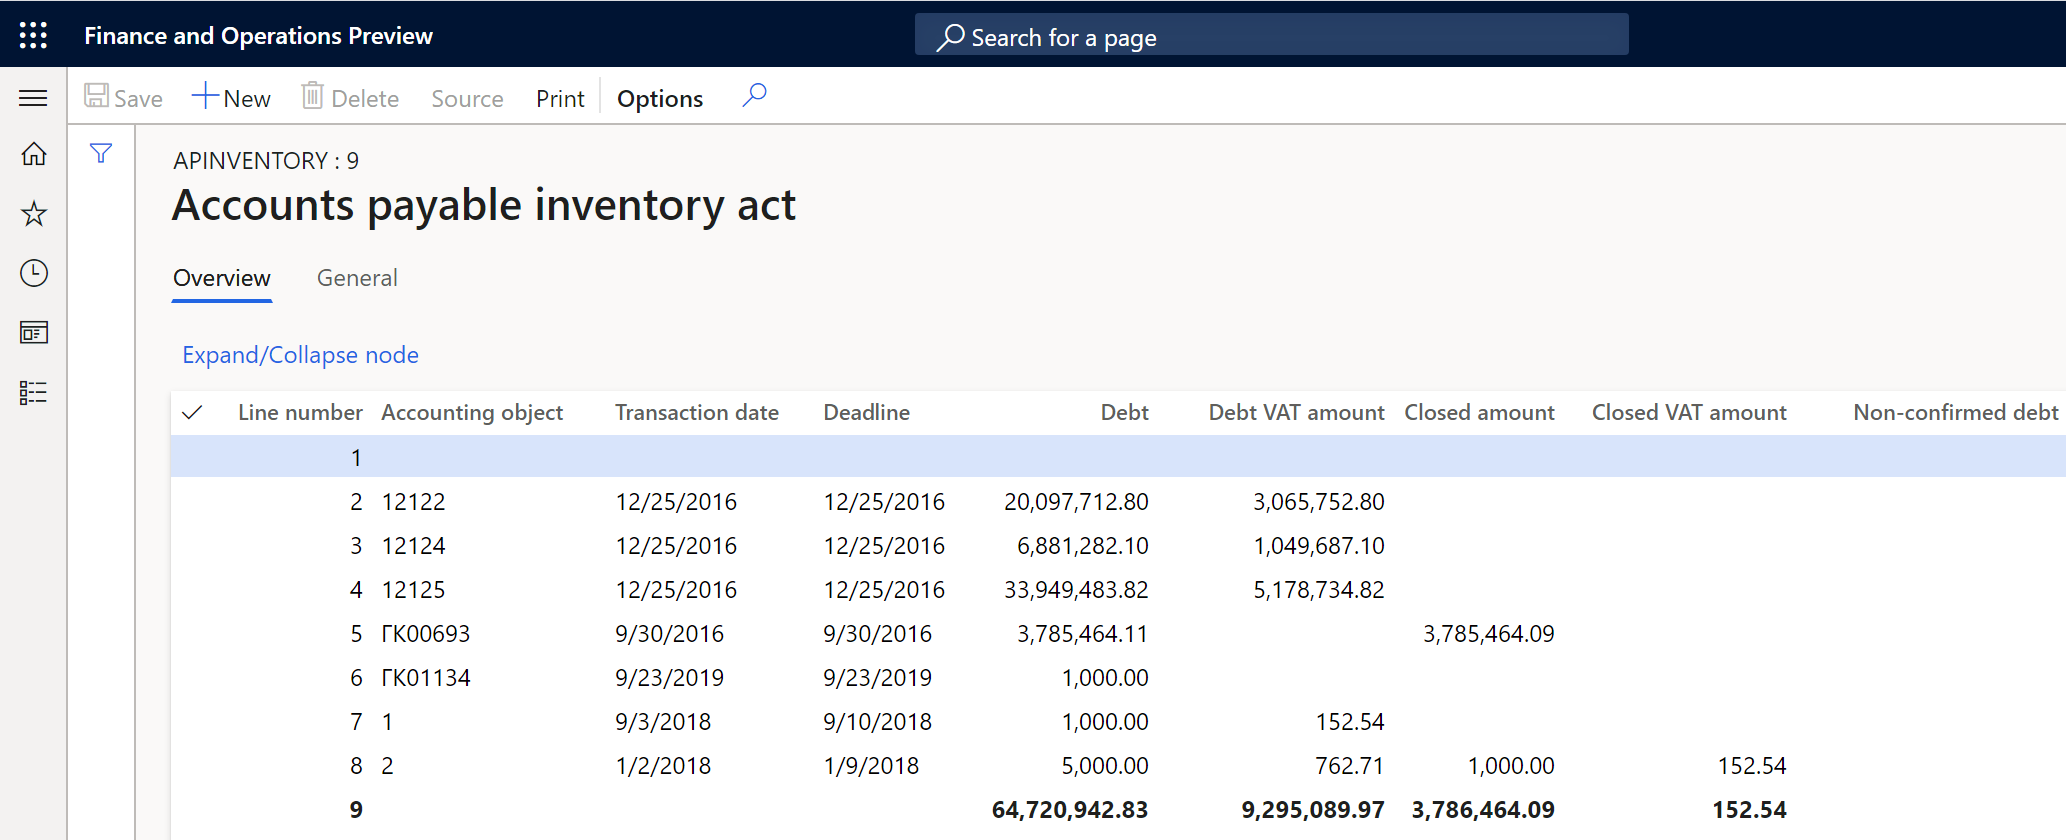 Accounts payable inventory act page.